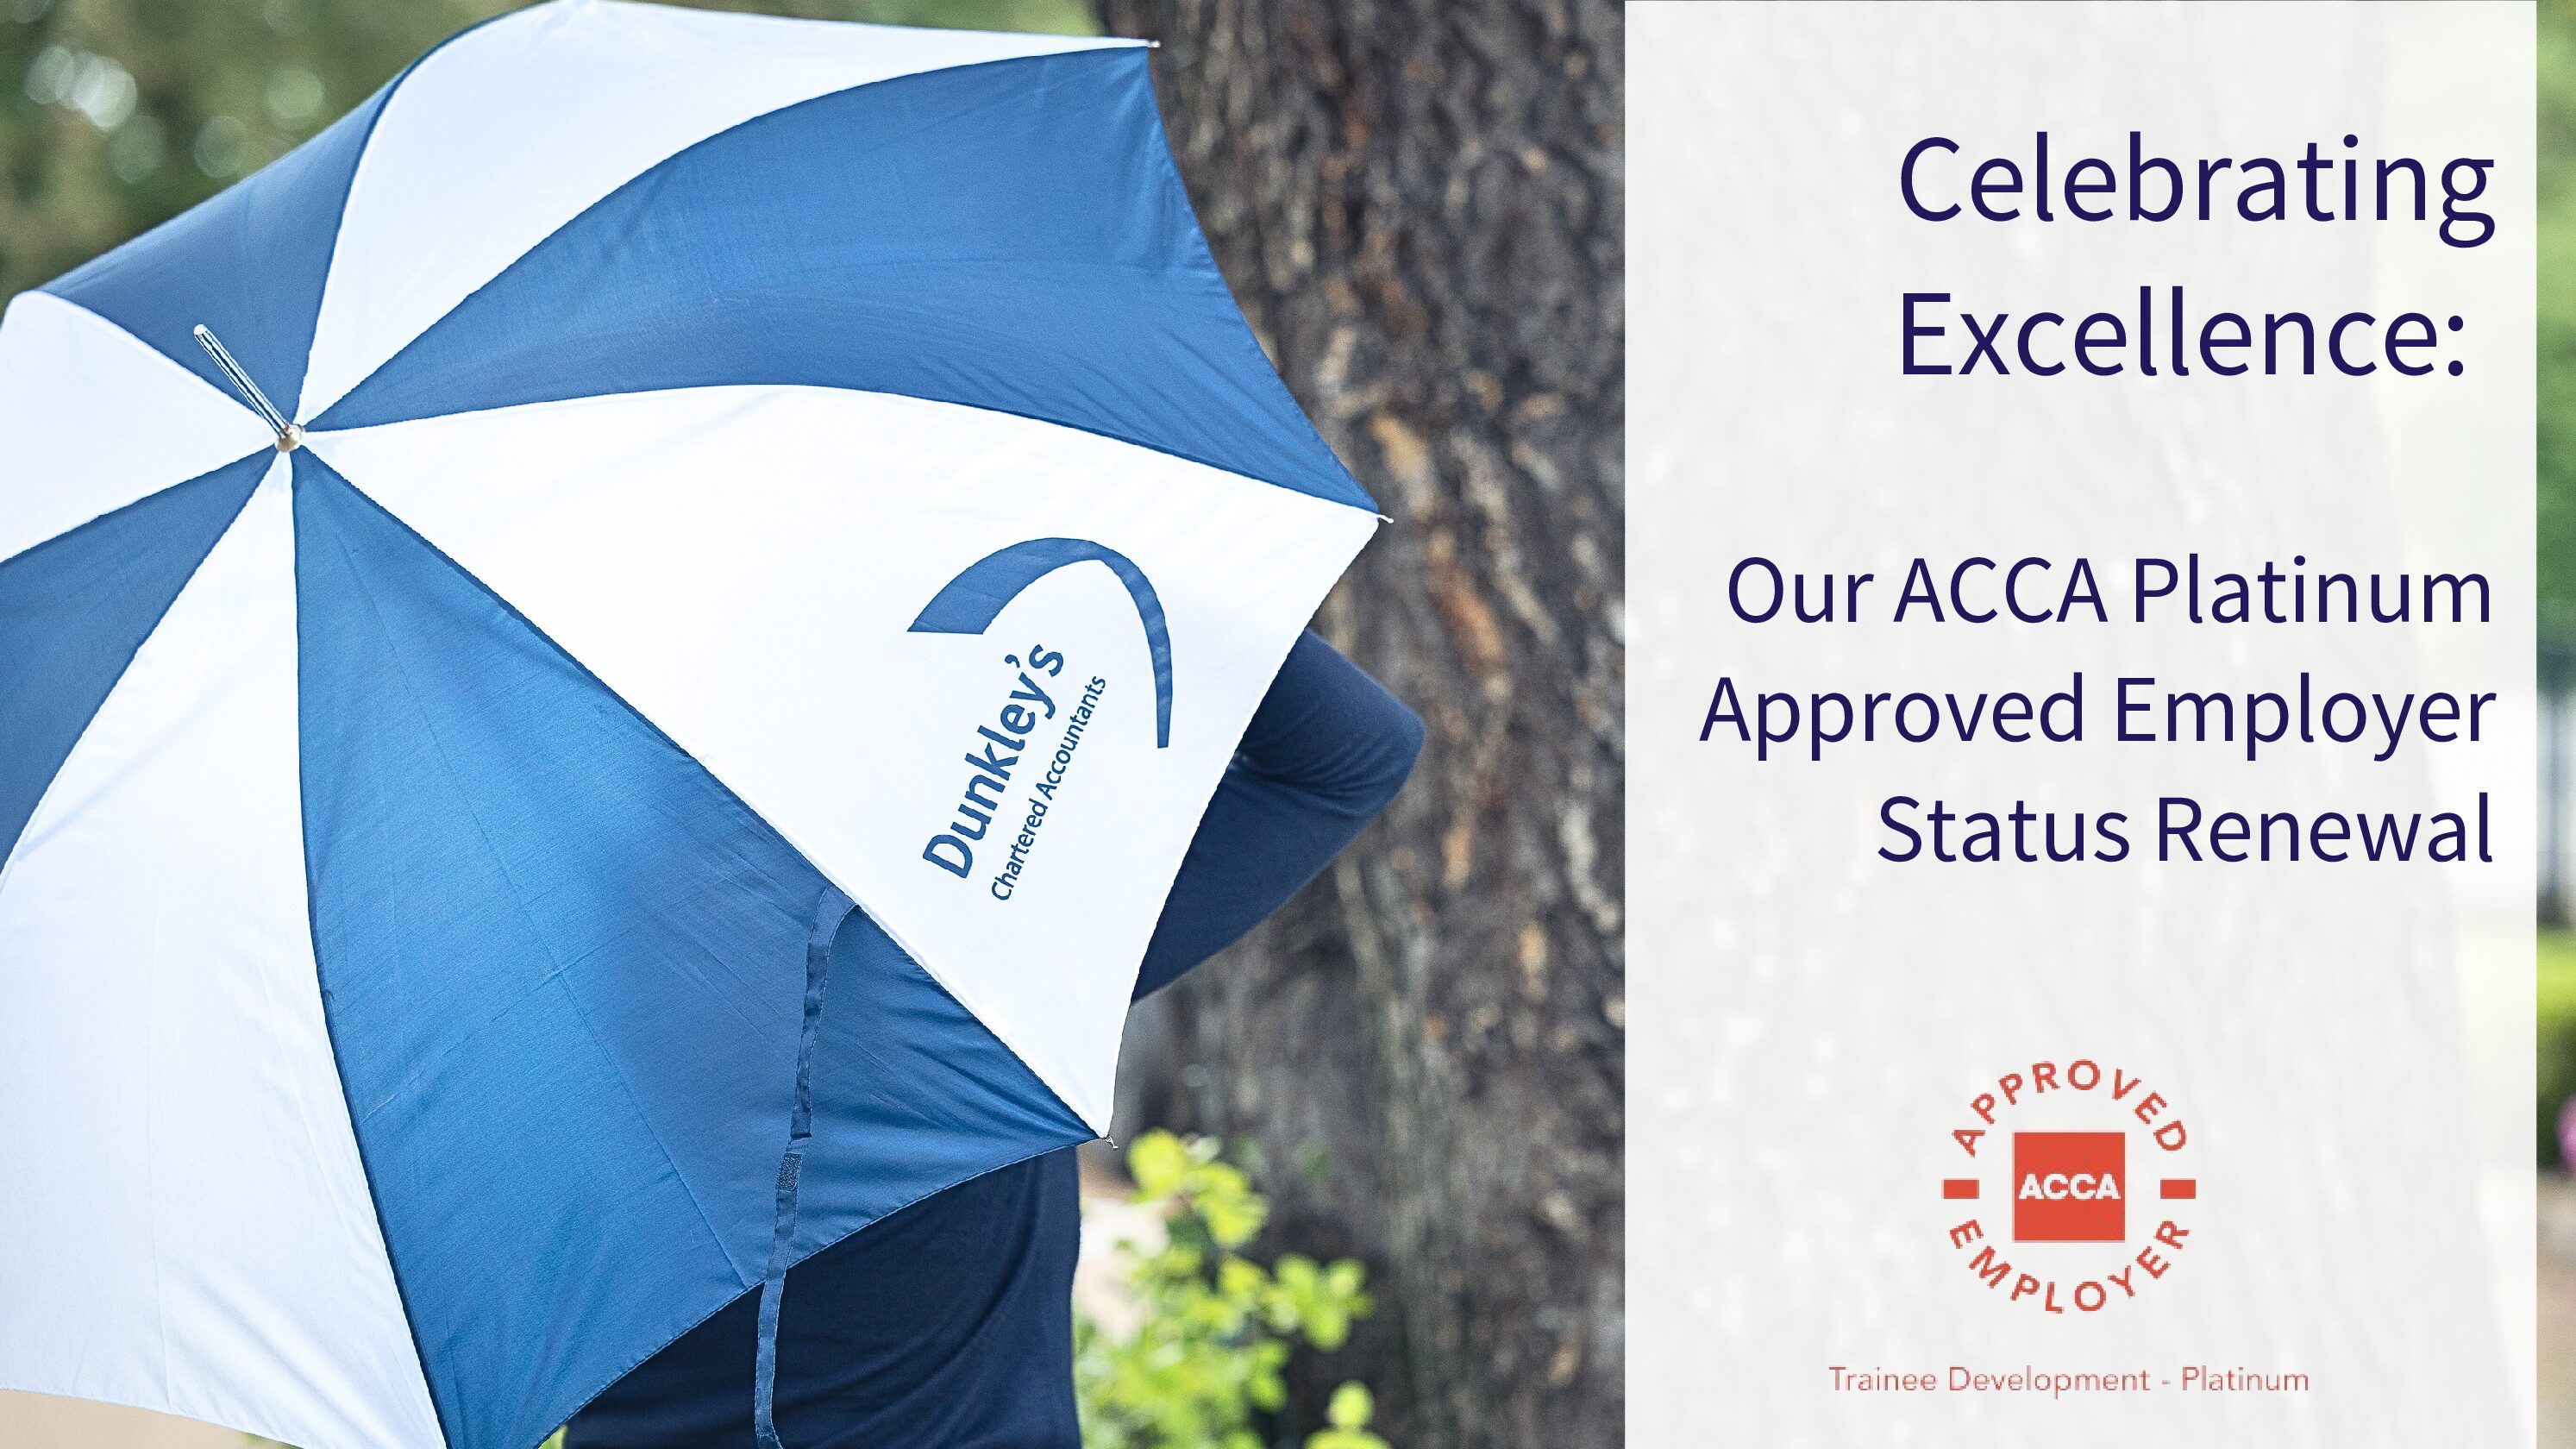 Celebrating Excellence: Our ACCA Platinum Approved Employer Status Renewal